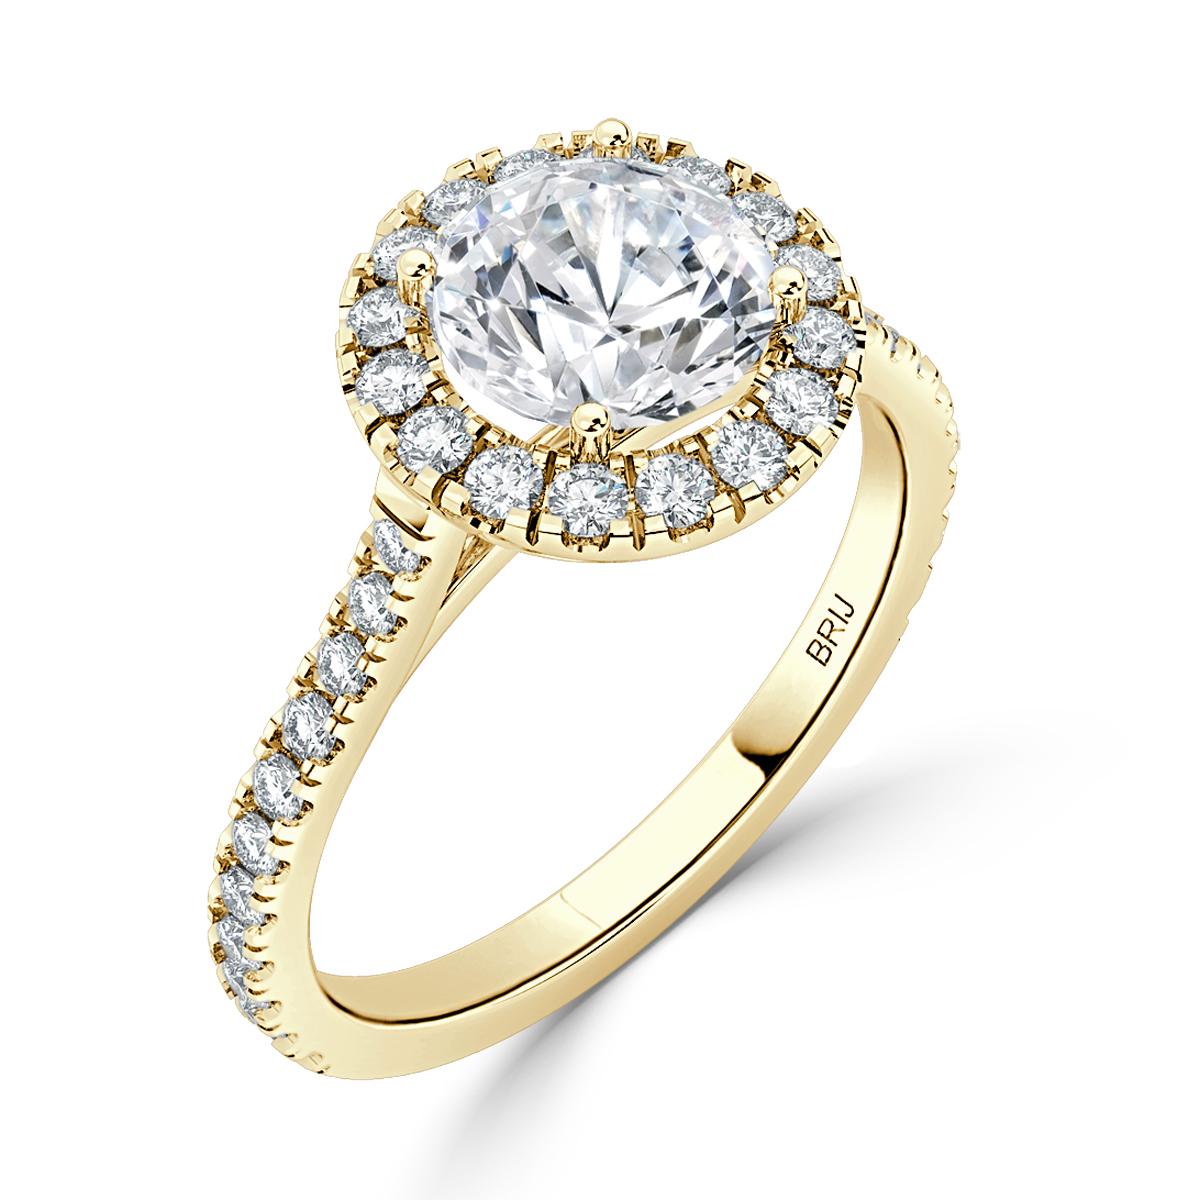 Simple, classic Diamond Halo engagement ring. Accented with 34 full cut diamonds along the shank  and Halo in a 18k Yellow Gold setting. 
GIA certified round center stone 0.60 CT
Total Carat weight above 1.00 CT

GIA Certified Diamond